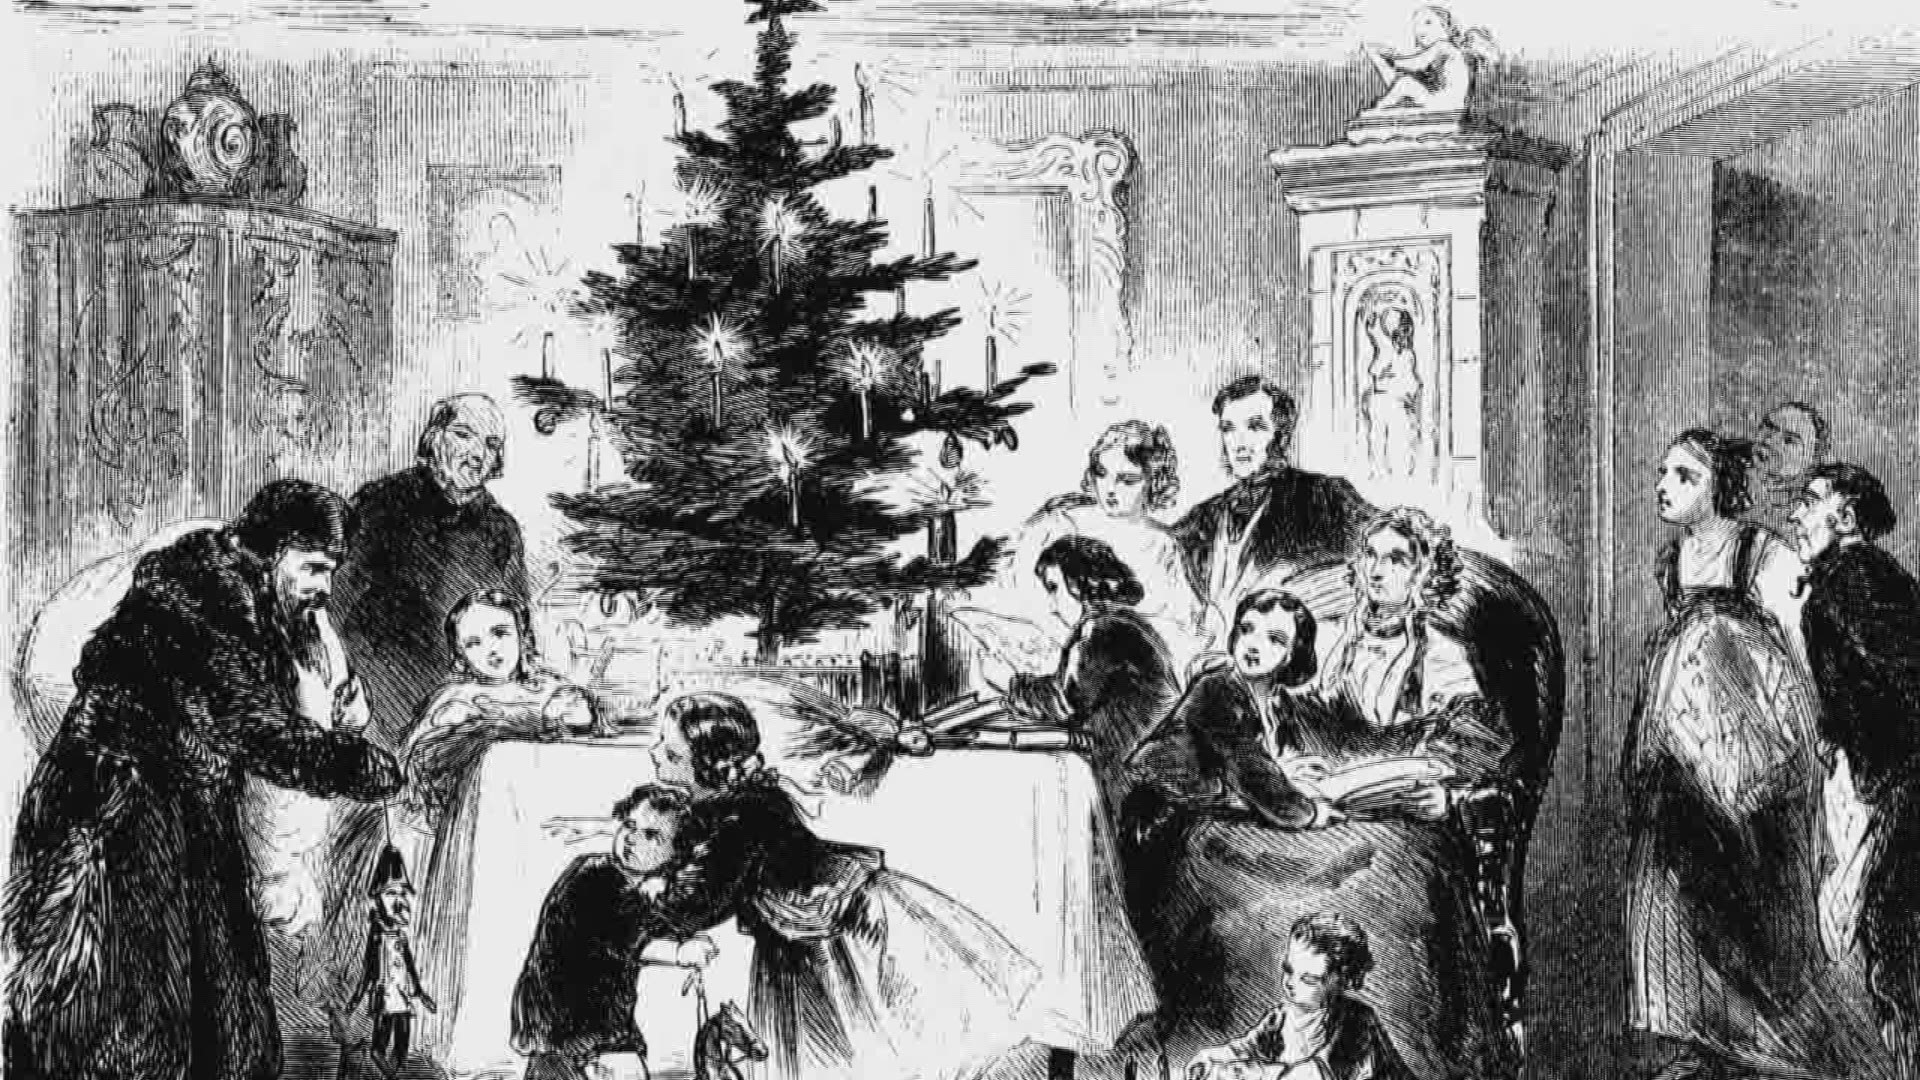 A brief history of Christmas tree decorations